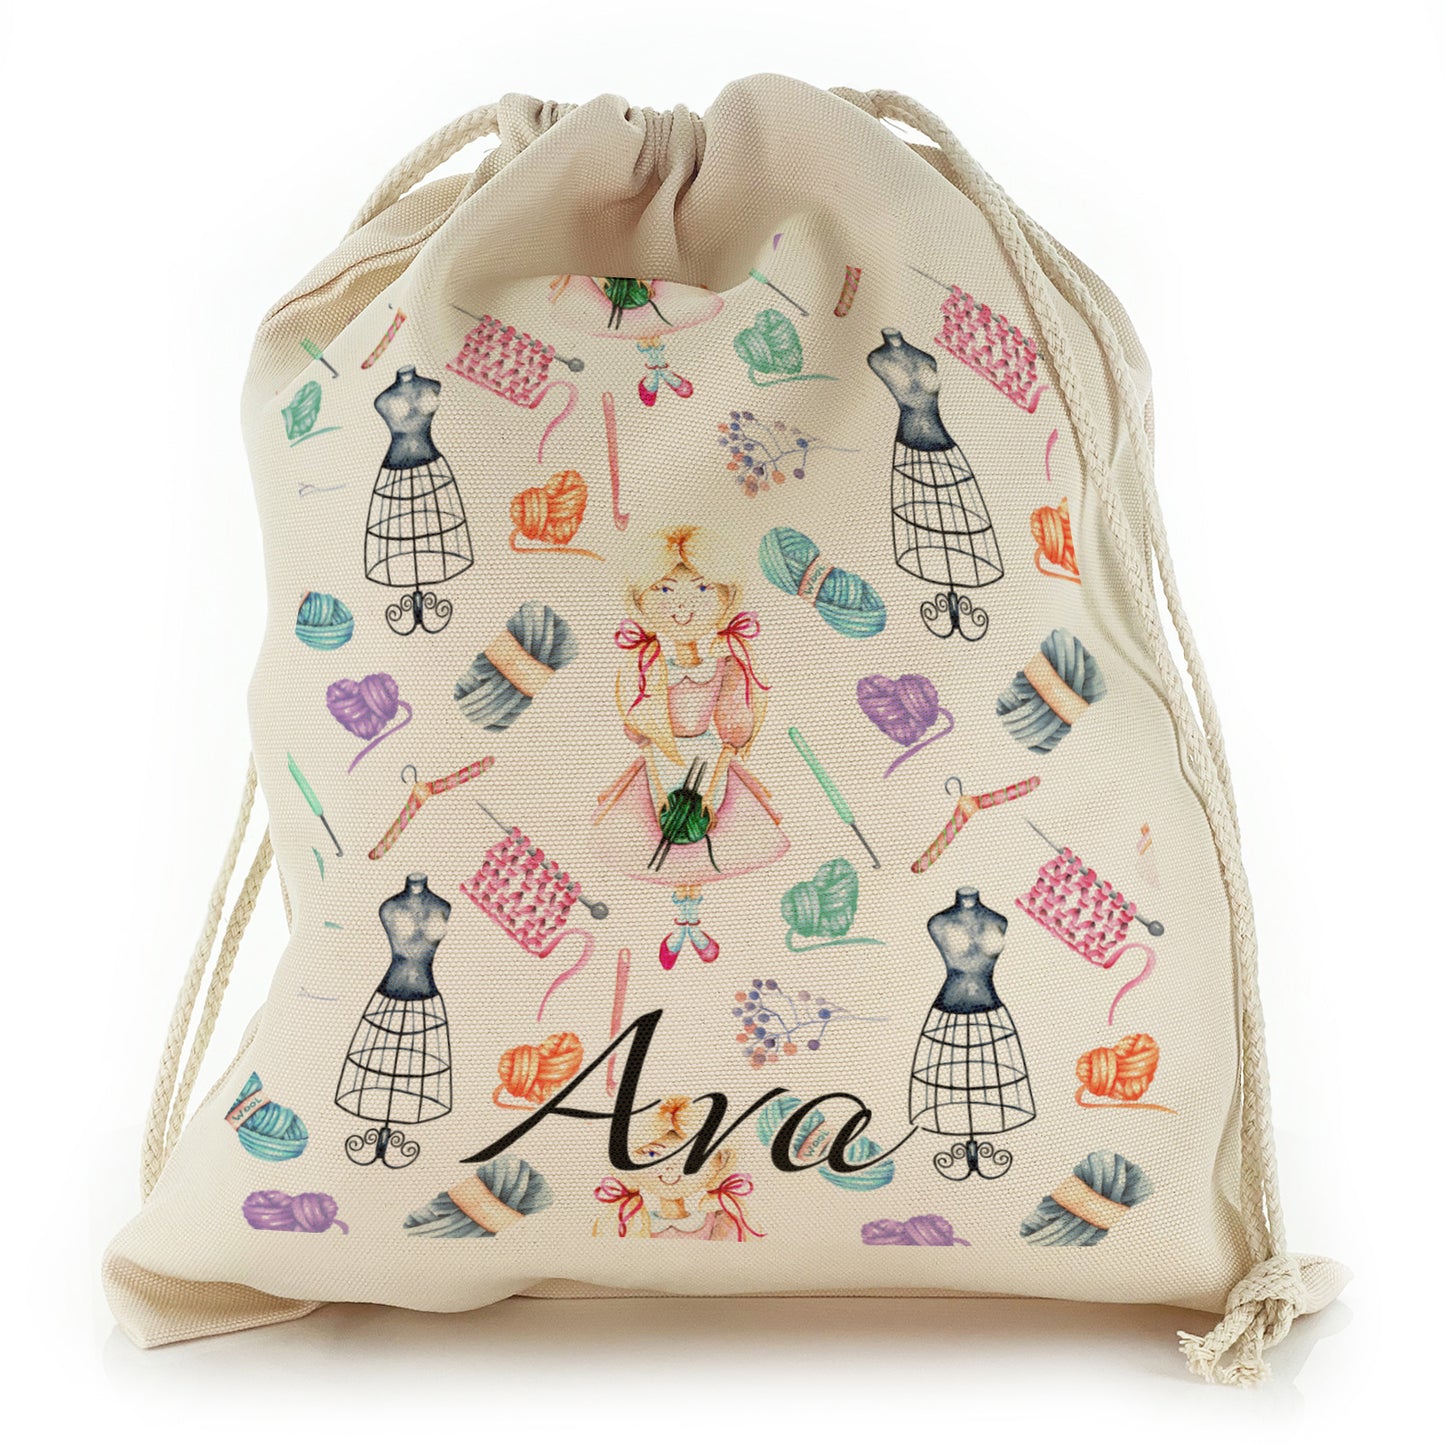 Personalised Canvas Sack with Stylish Text on Knitting Girl and Accessories Pattern